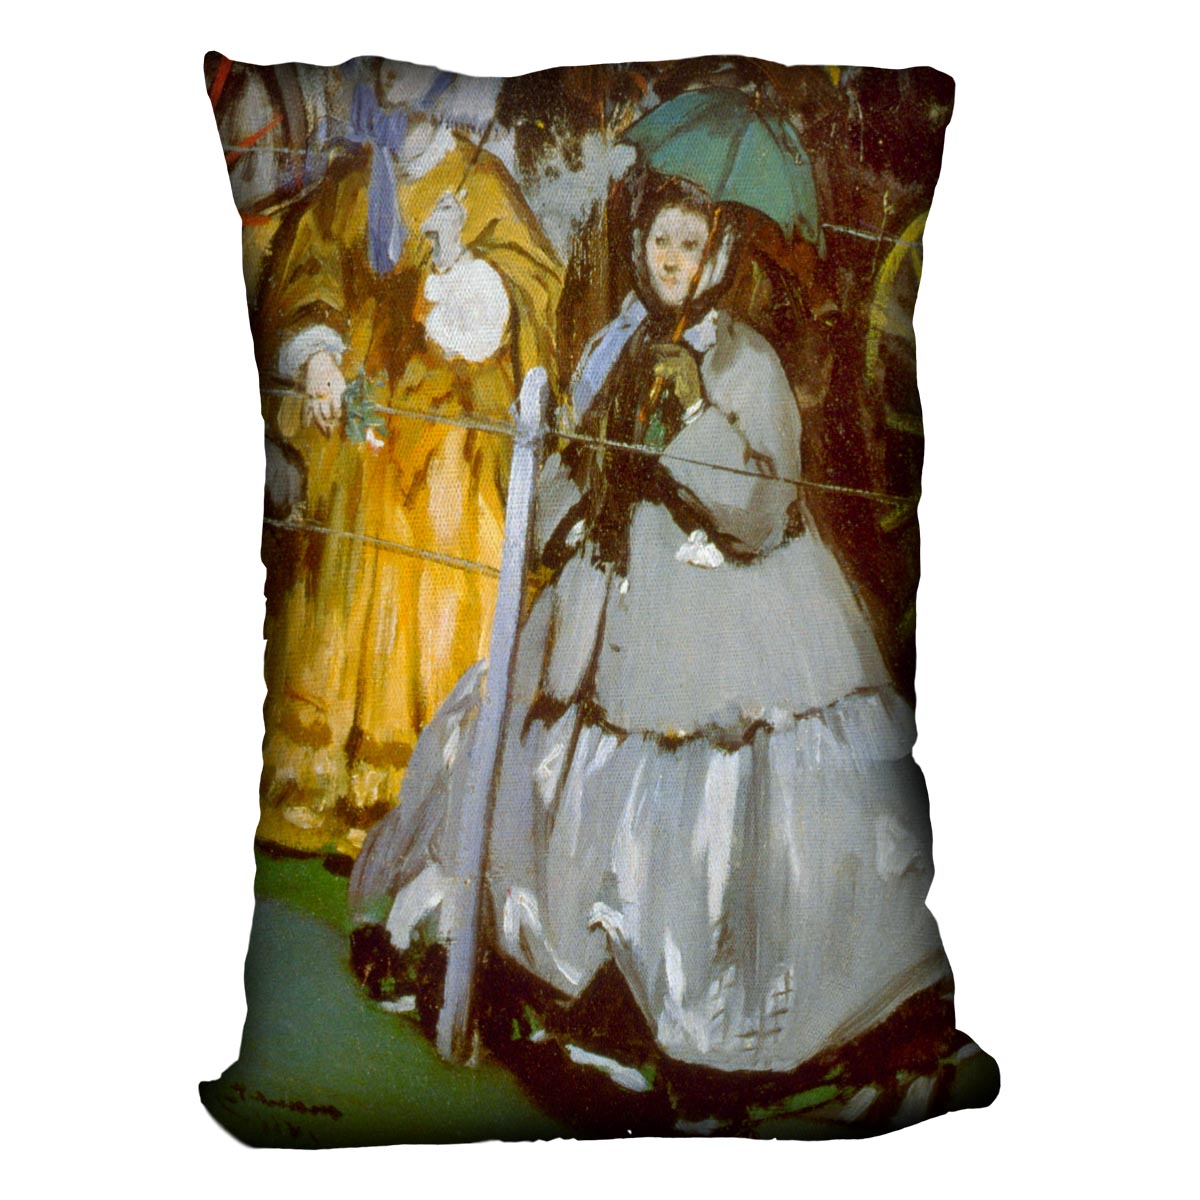 Racecourse by Manet Cushion